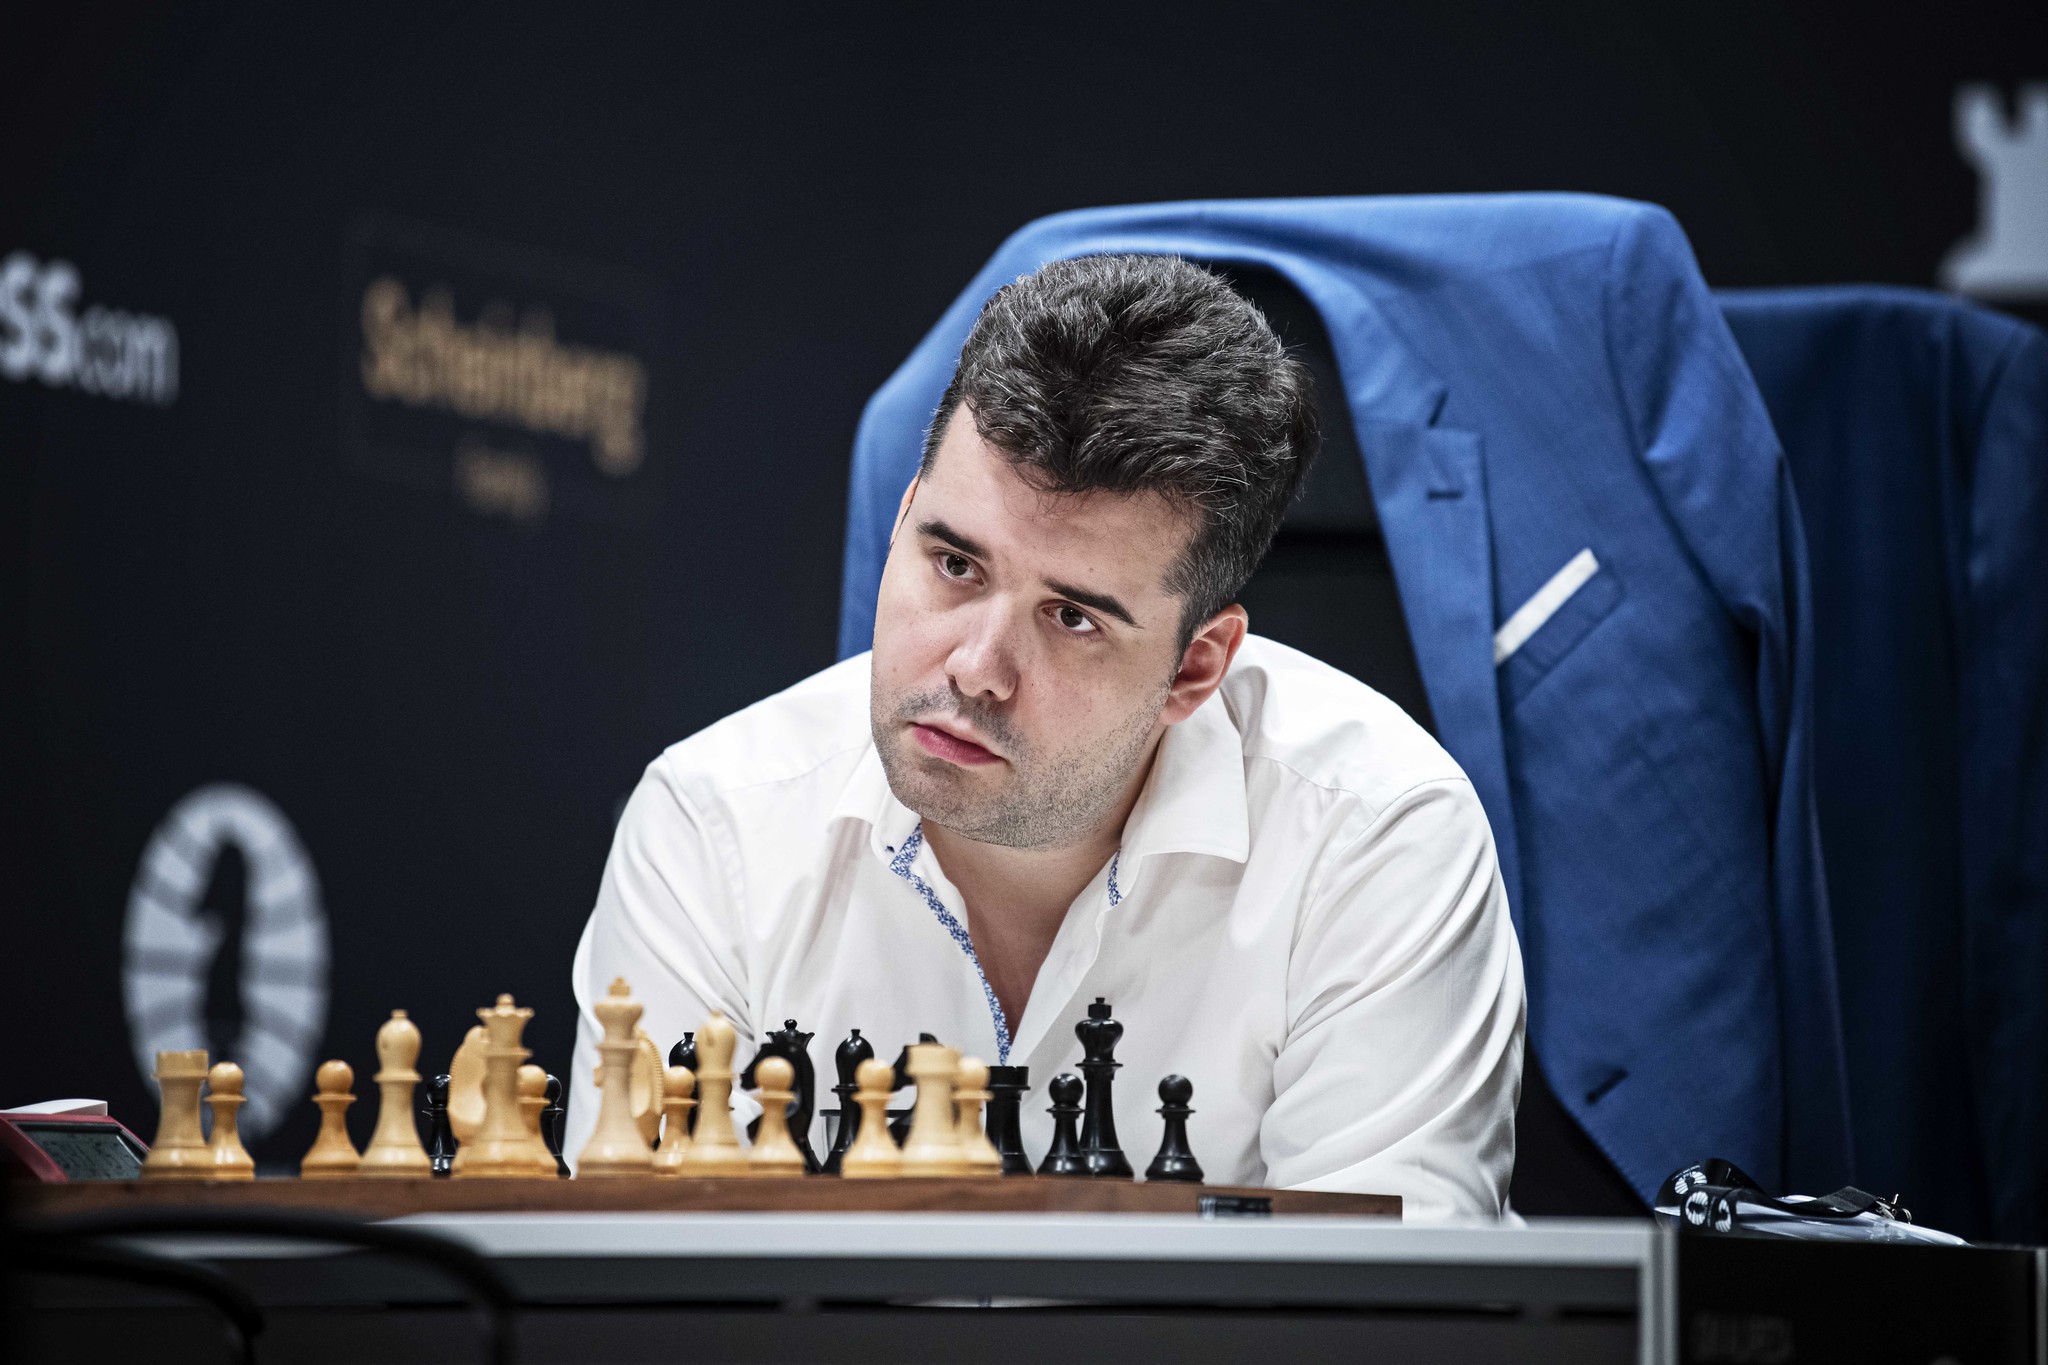 Nepomniachtchi hits 2792 after his 5th win at the 2022 Candidates